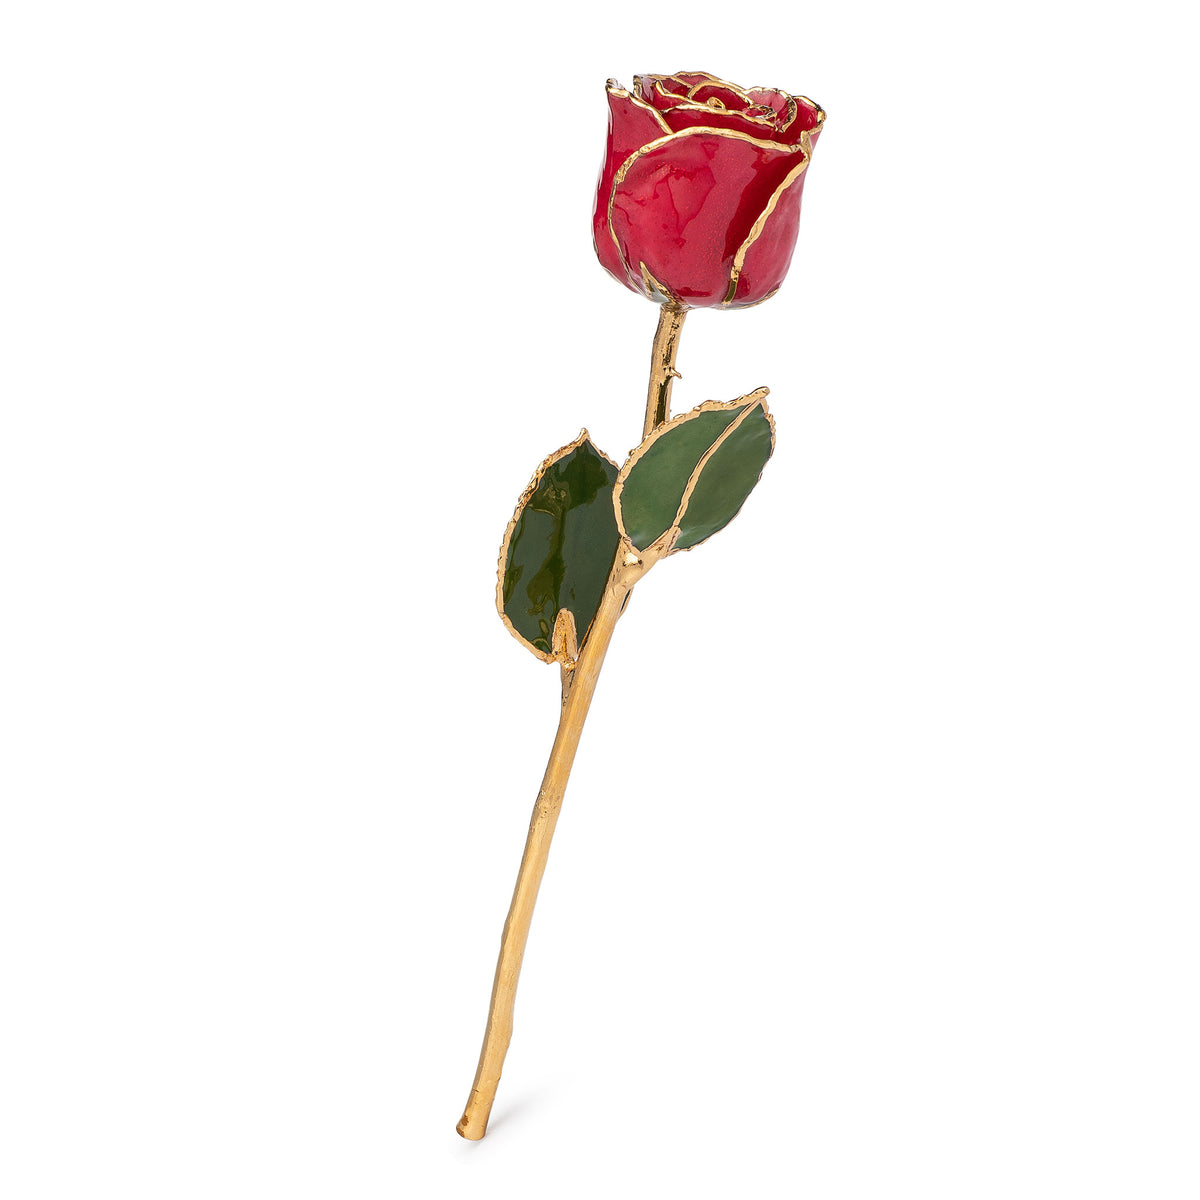 24K Gold Trimmed Forever Rose with Red Petals with Suspended Sparkles. View of Stem, Leaves, and Rose Petals and Showing Detail of Gold Trim